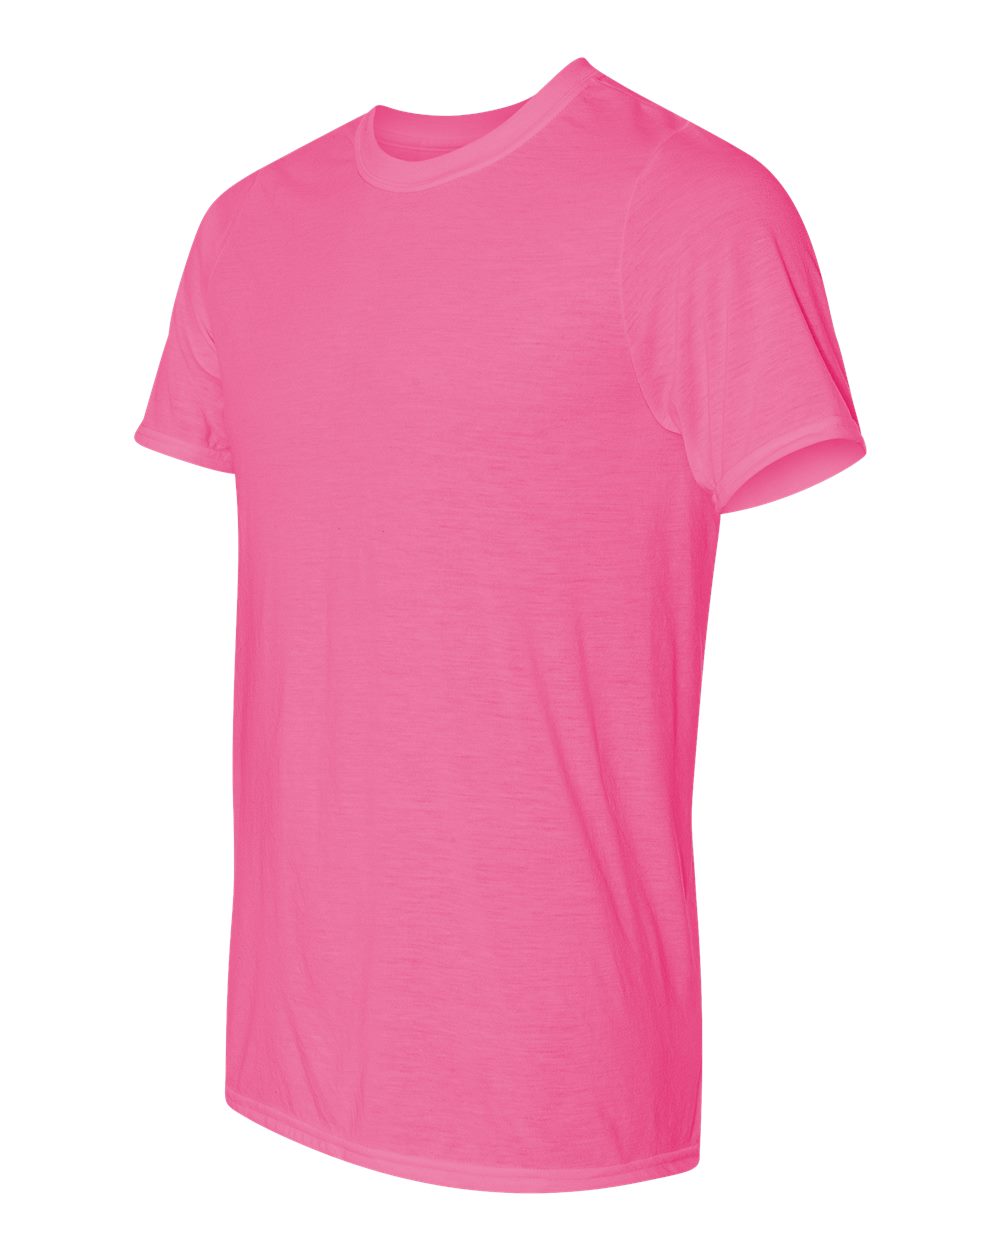 Adult Unisex Sublimation Short Sleeve-4 Colors Available